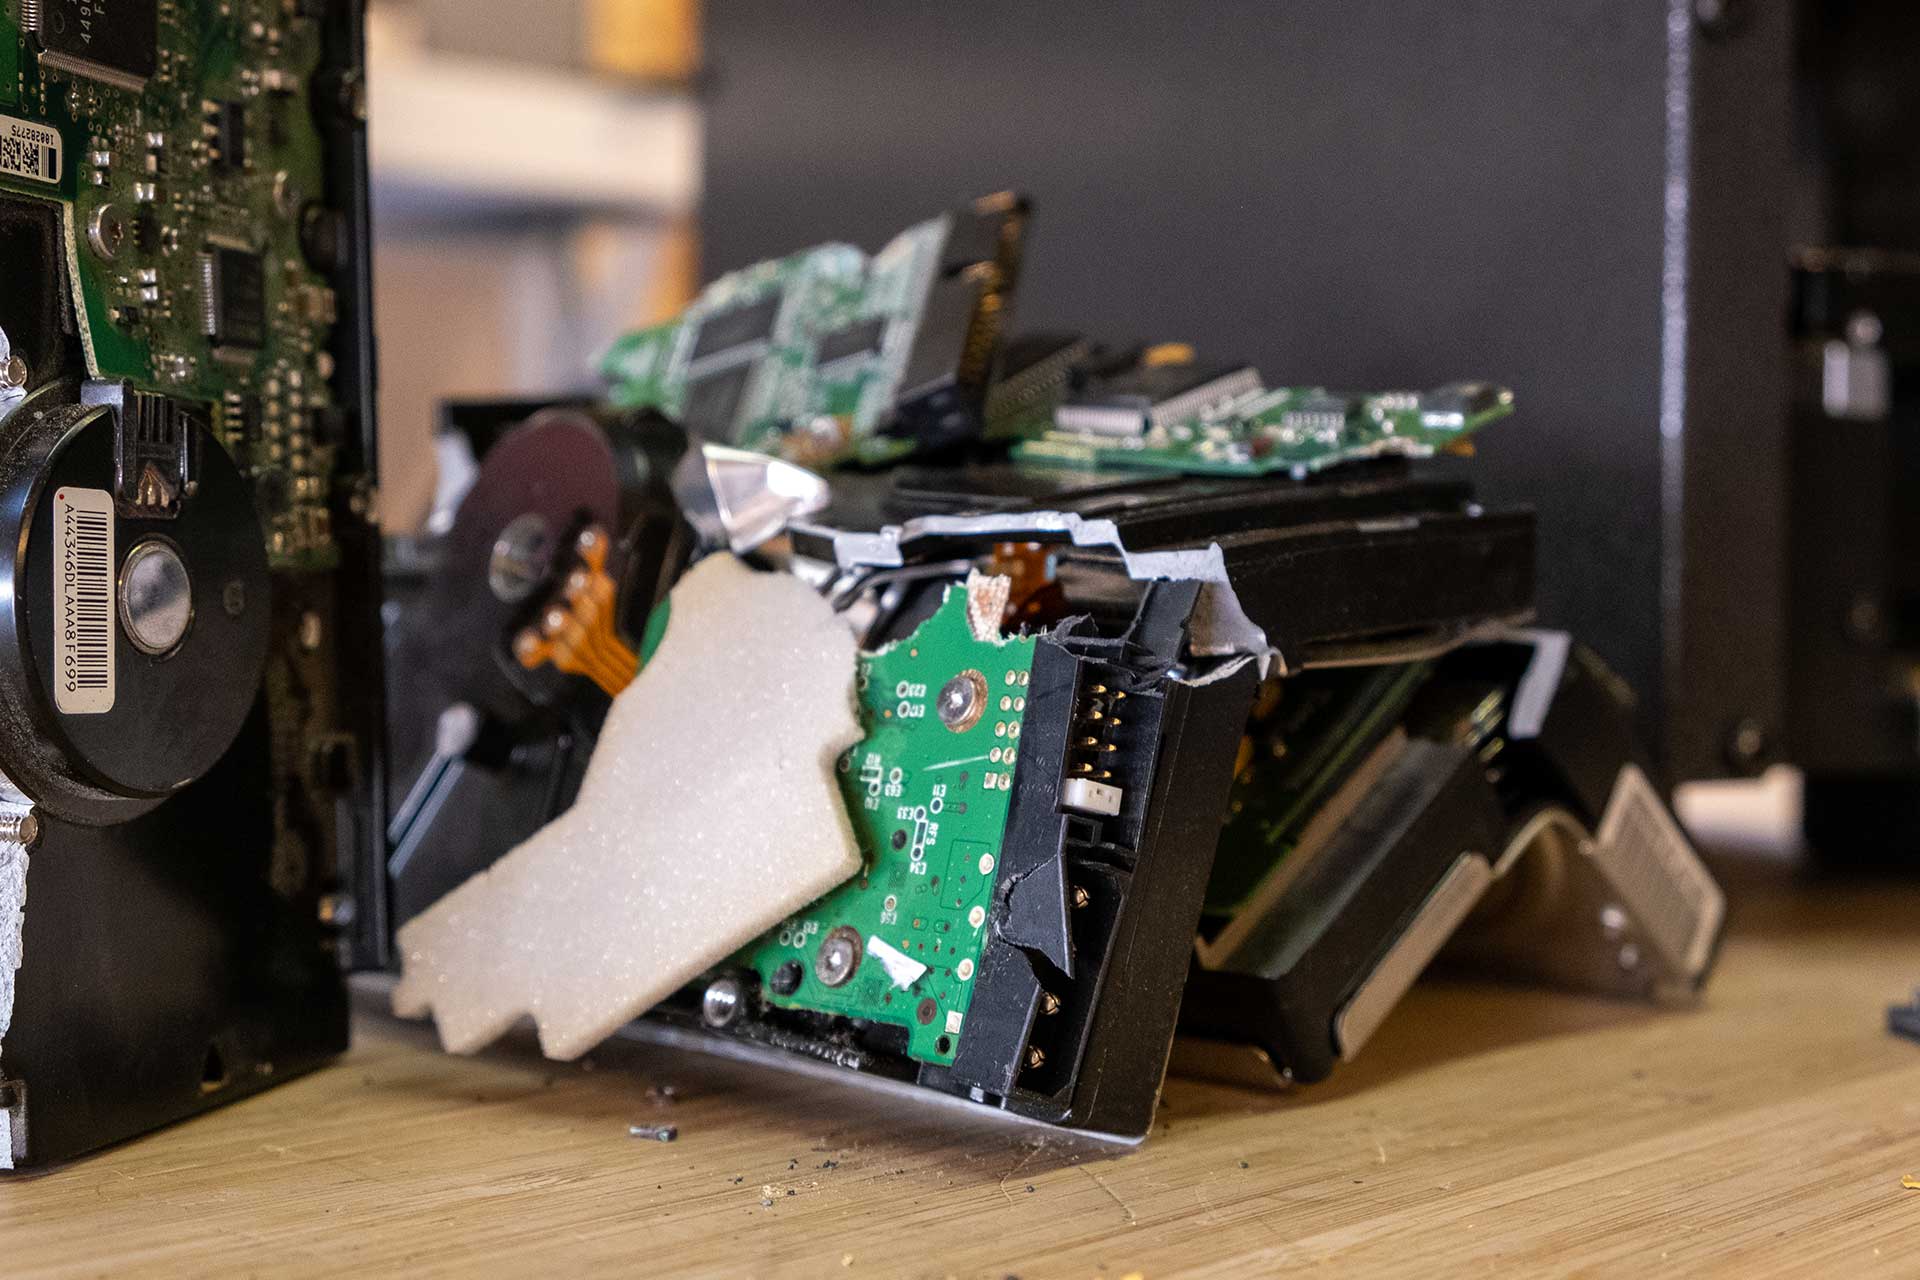 Hard drive recycling service with data destruction - Laval, Montreal